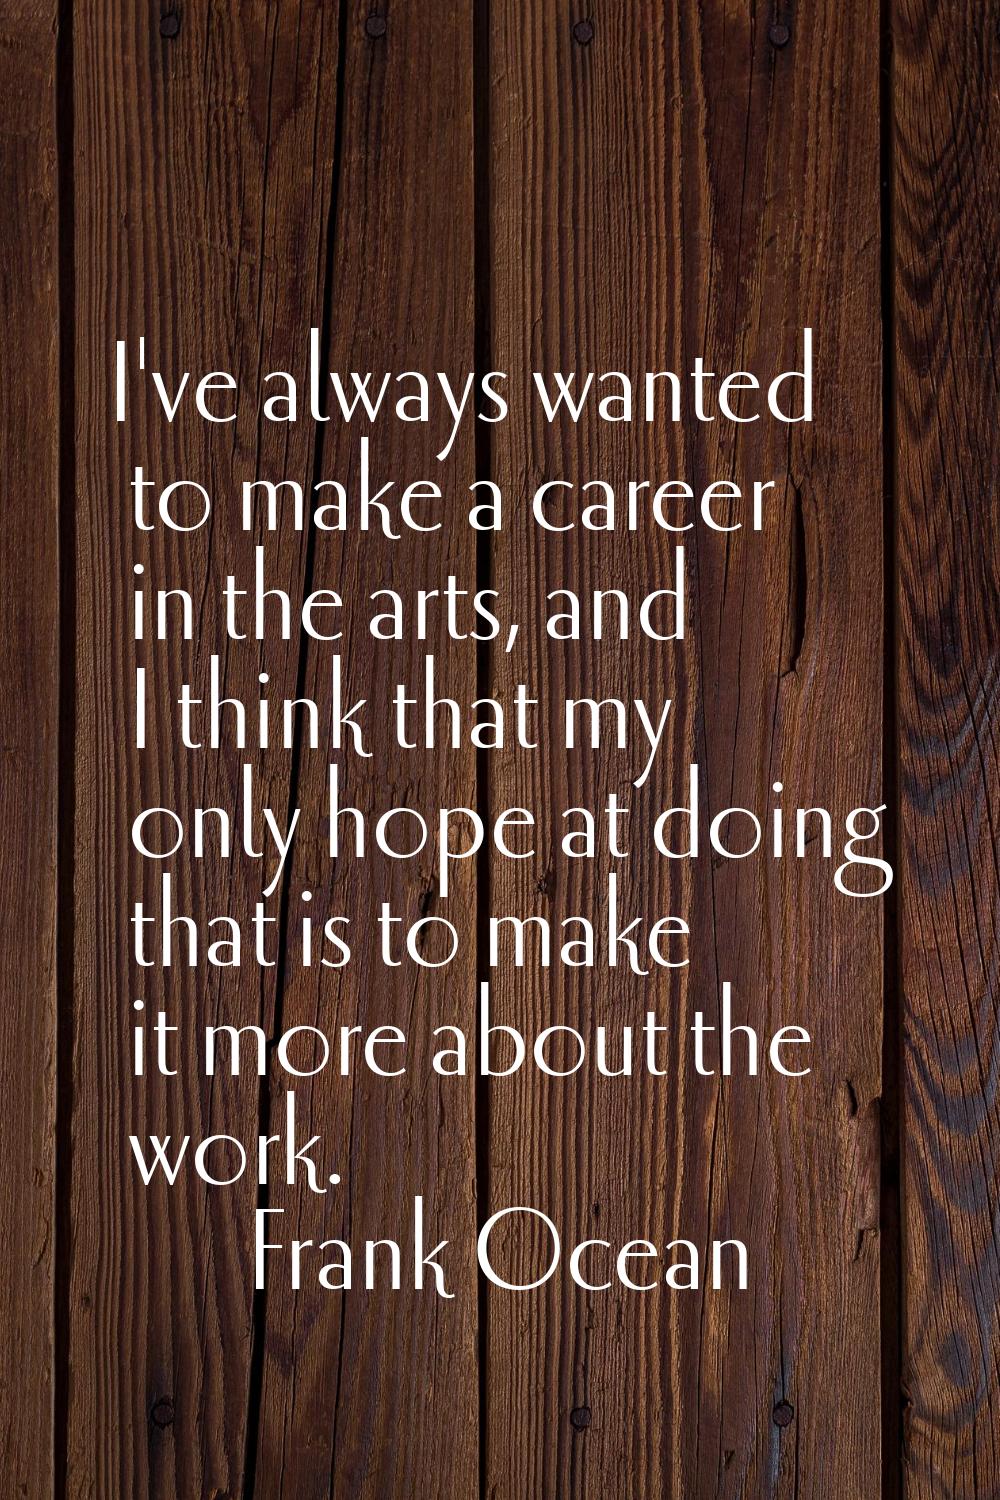 I've always wanted to make a career in the arts, and I think that my only hope at doing that is to 